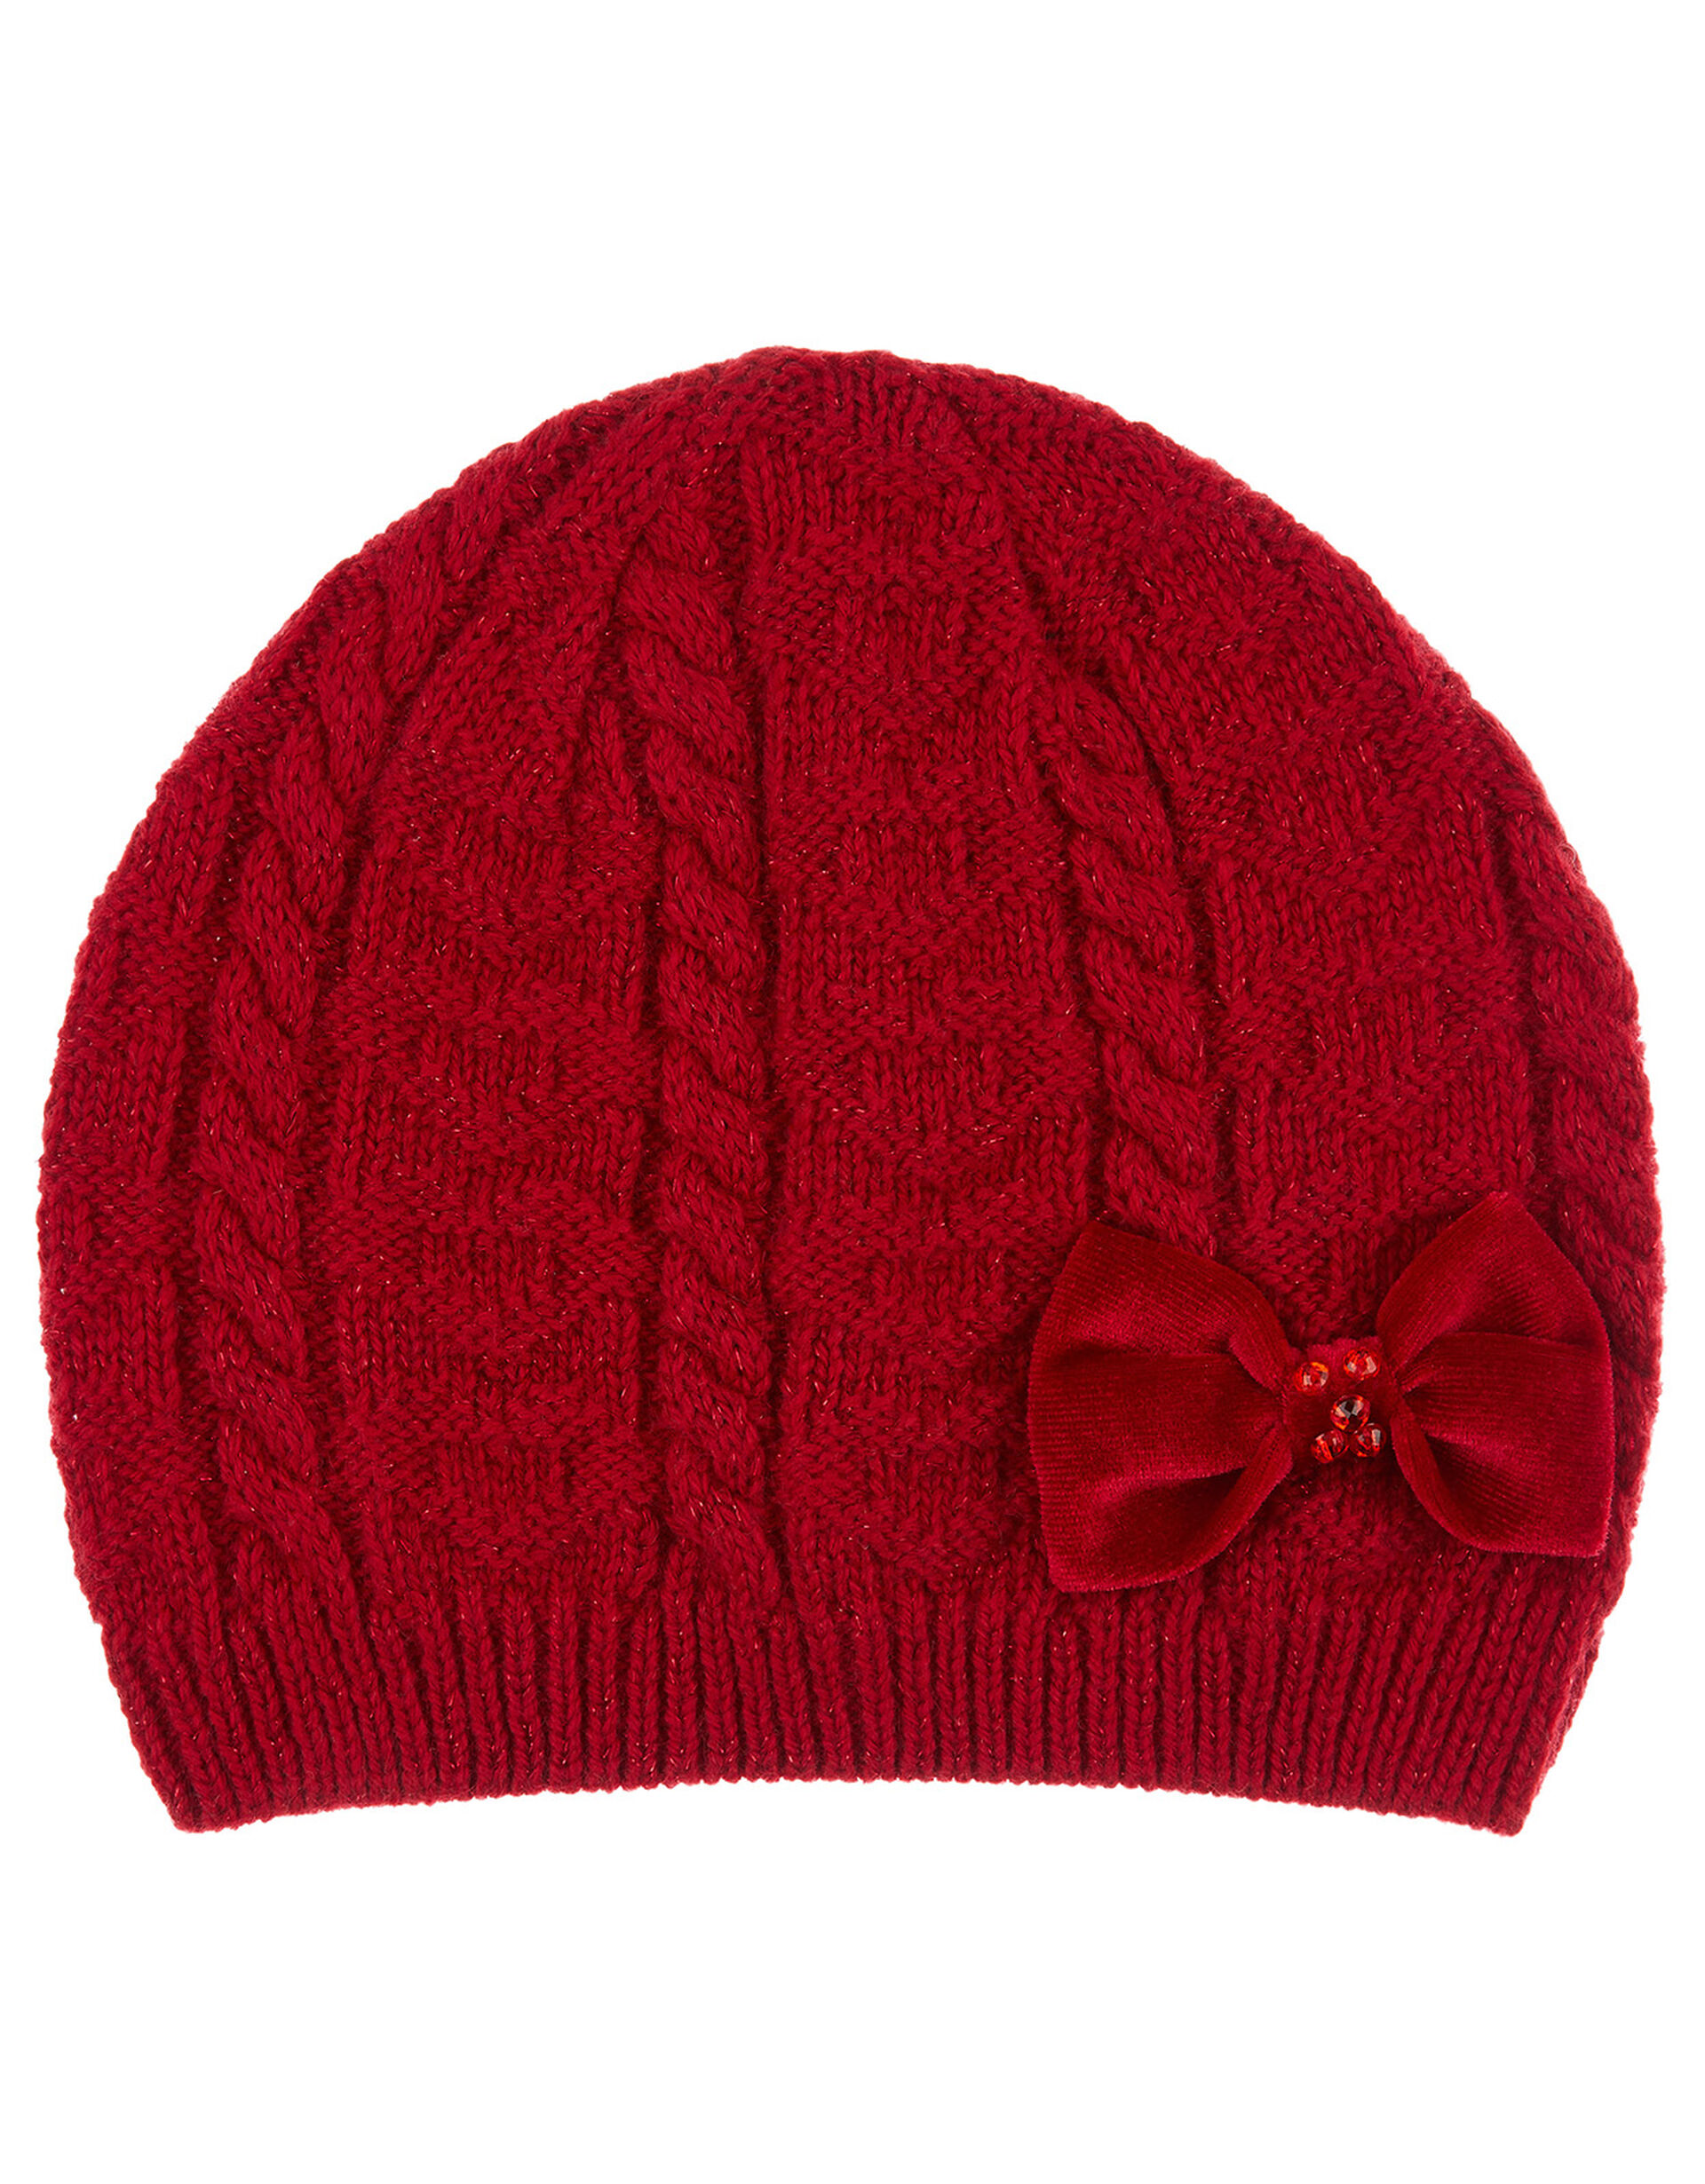 Ruby Bow Cable Knit Beanie, Red (RED), large